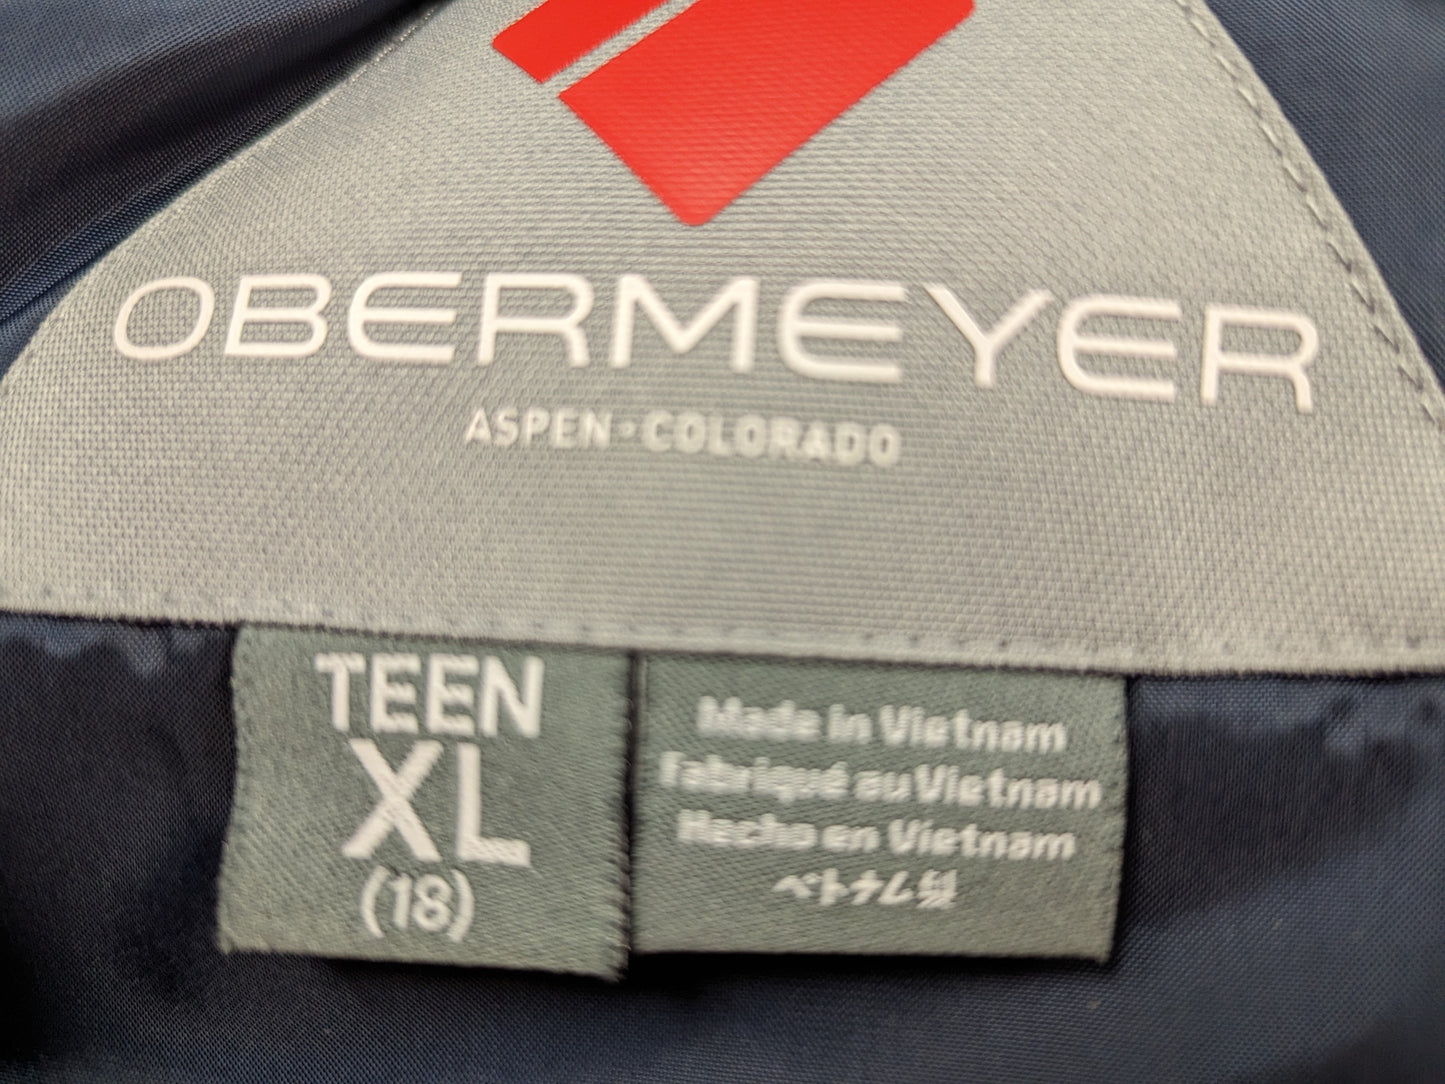 Obermeyer Hooded Ski/Board Youth Jacket/Coat Size Youth XL Color Blue Condition Used